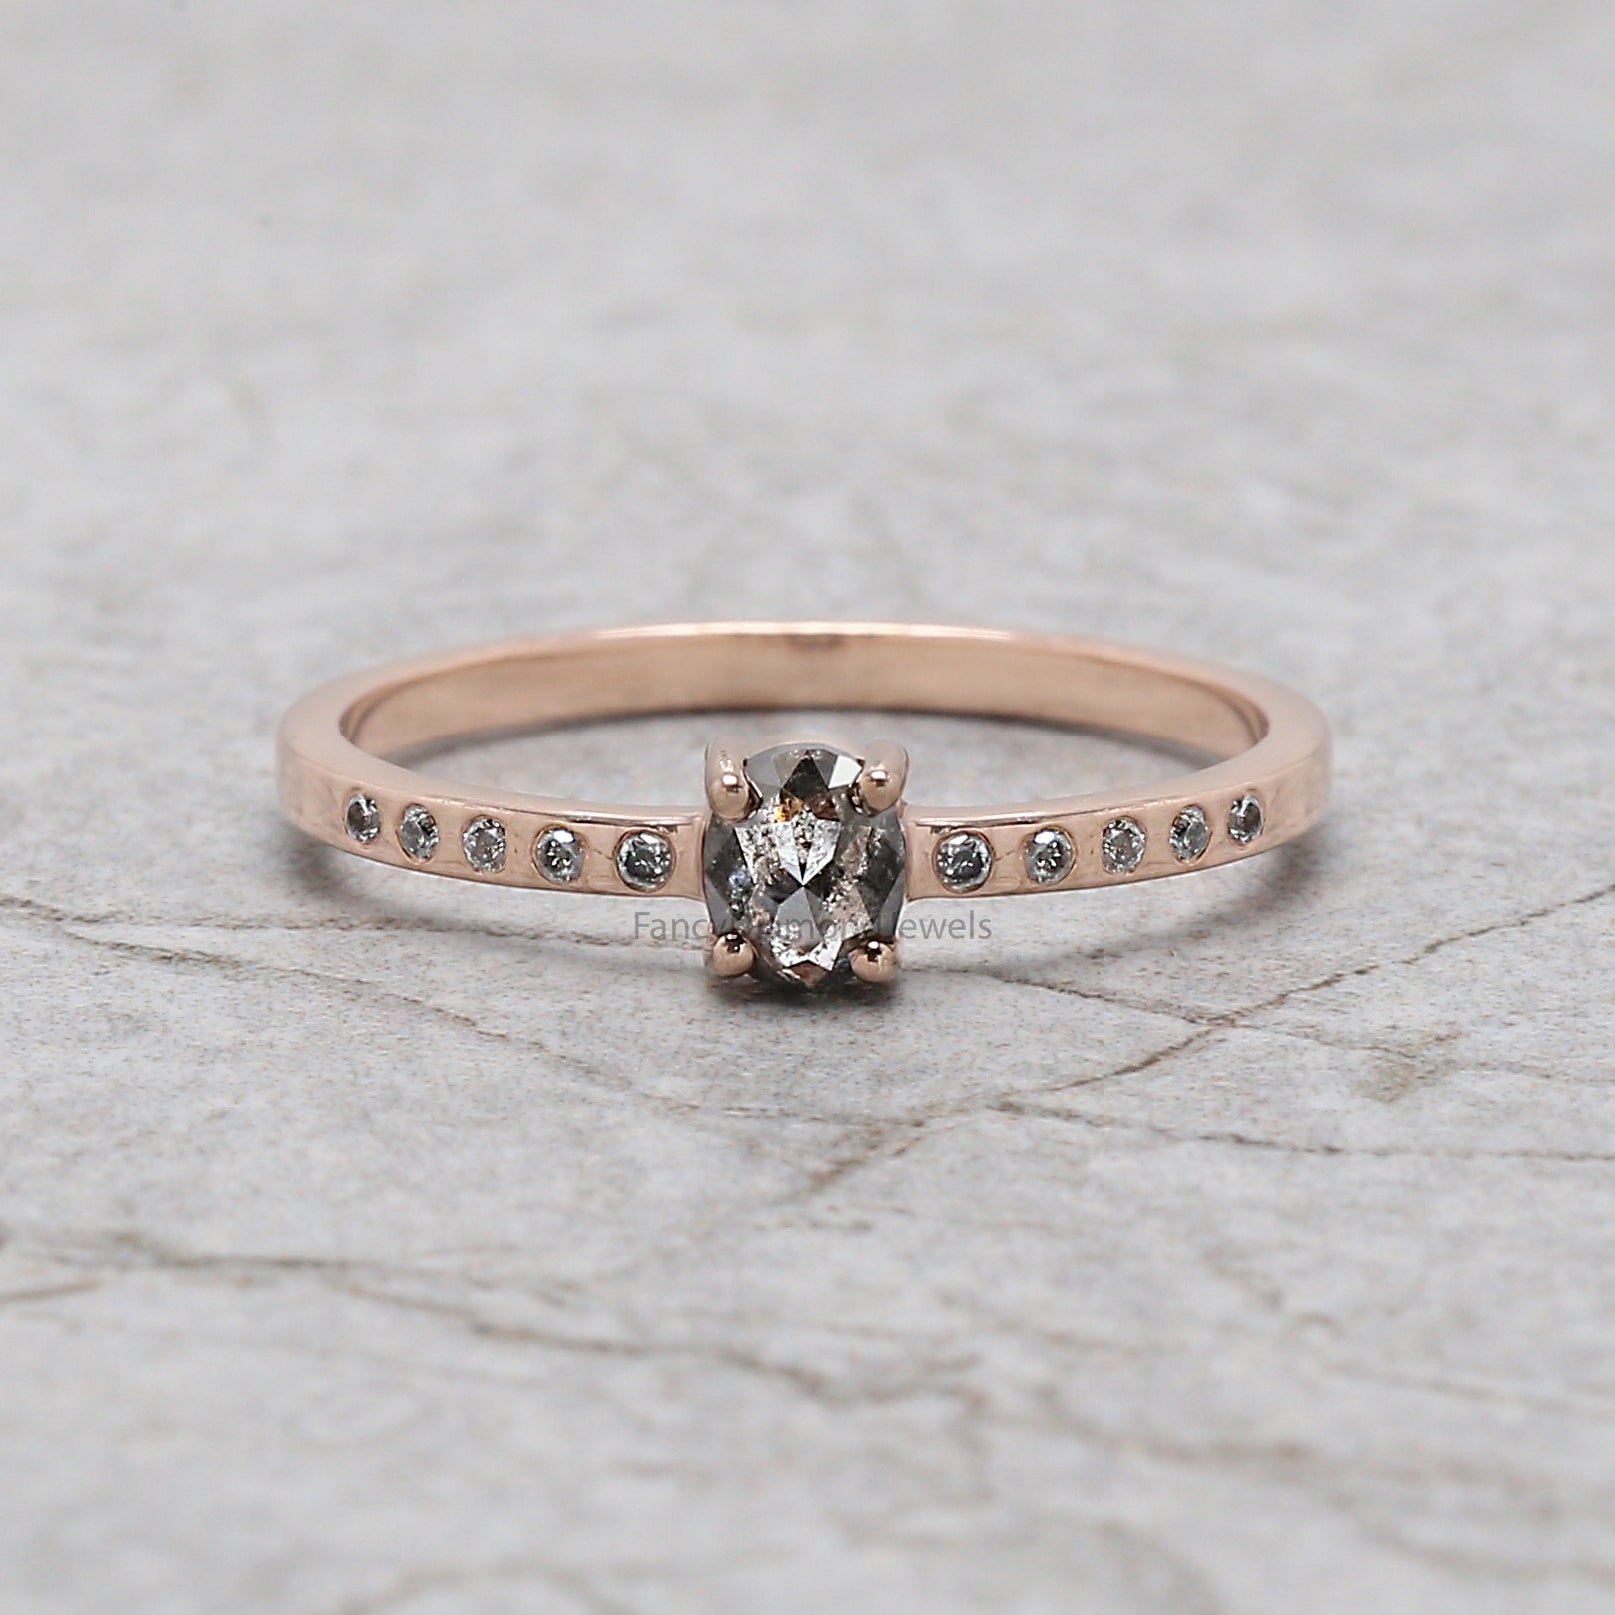 Oval Cut Salt And Pepper Diamond Ring 0.32 Ct 4.50 MM Oval Diamond Ring 14K Solid Rose Gold Silver Oval Engagement Ring Gift For Her QN9185